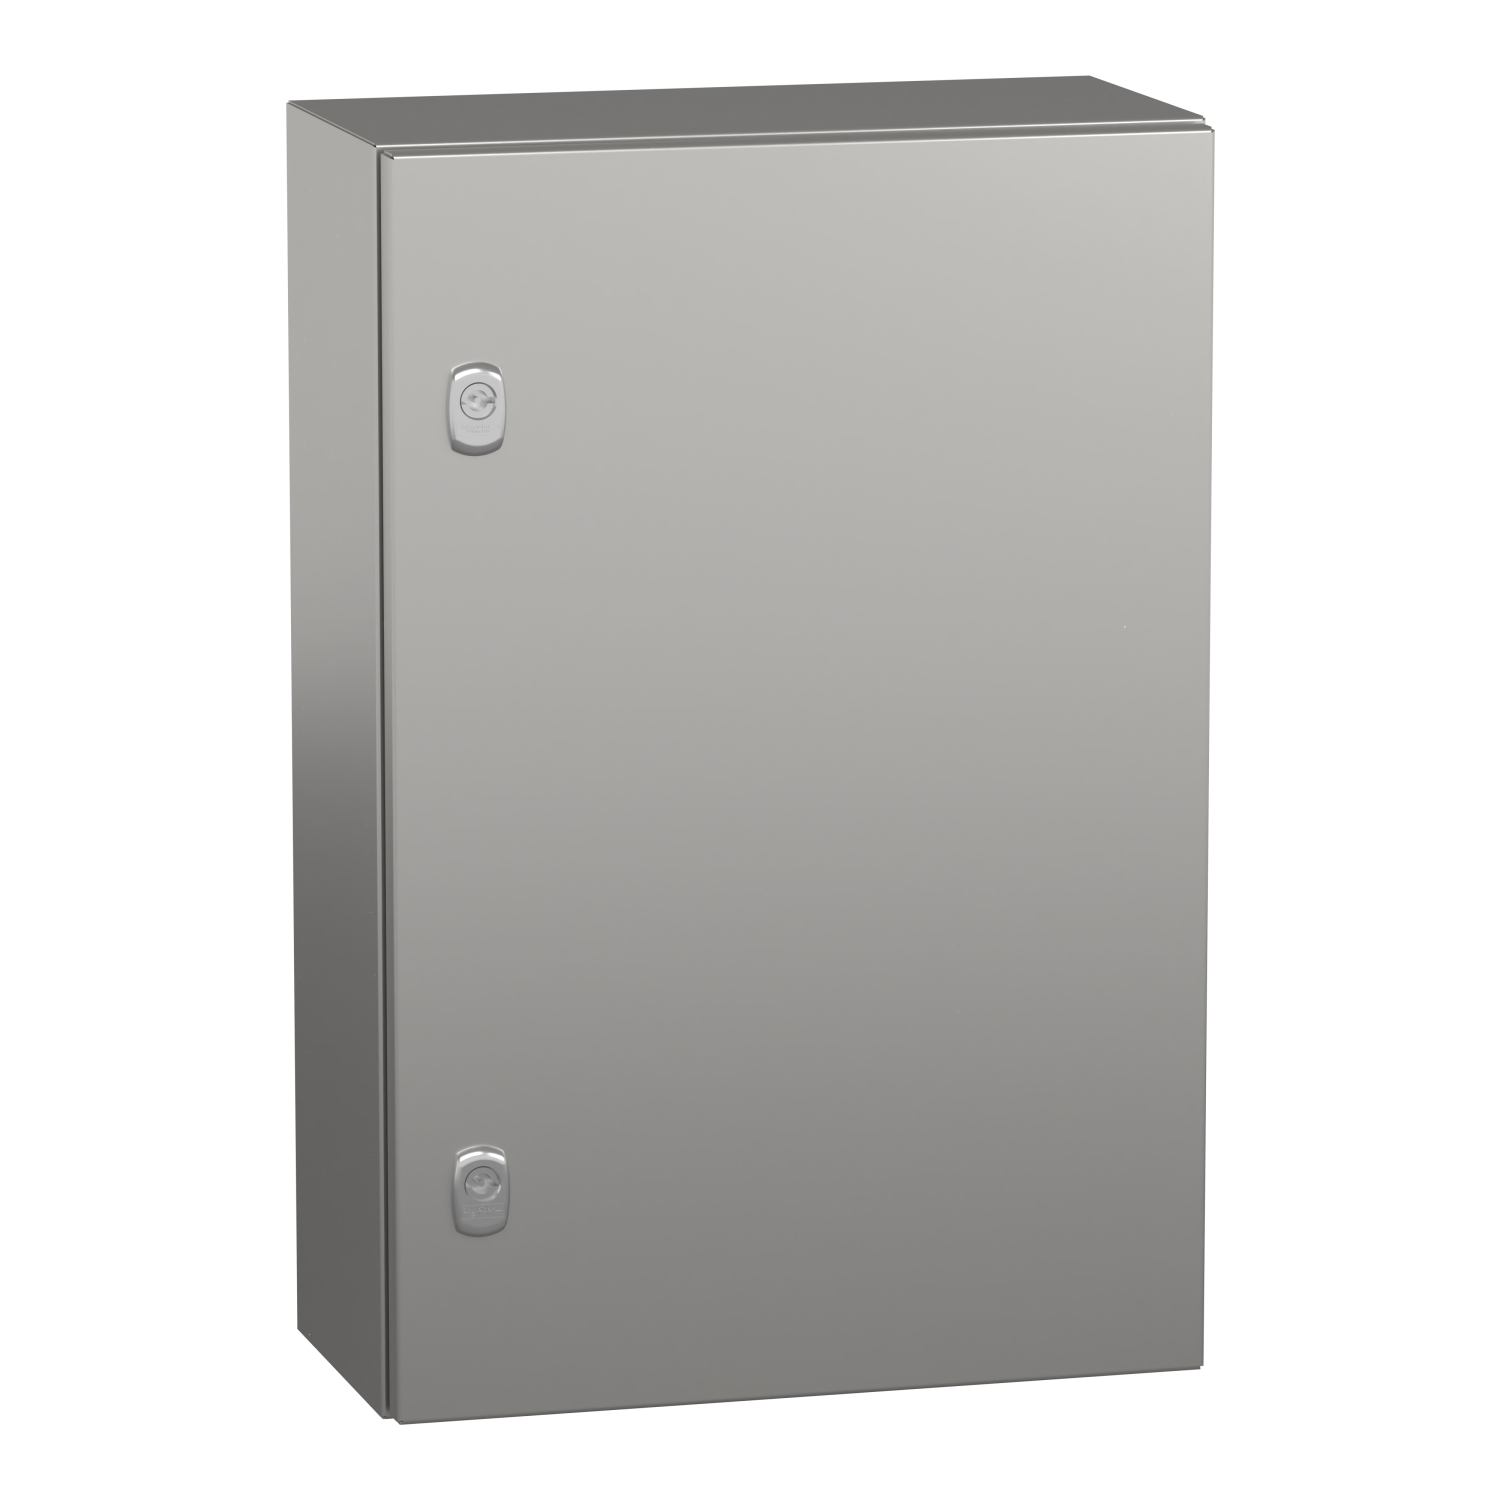 Wall mounted enclosure, Spacial S3X, stainless steel 304L, plain door, 600x400x200mm, IP66